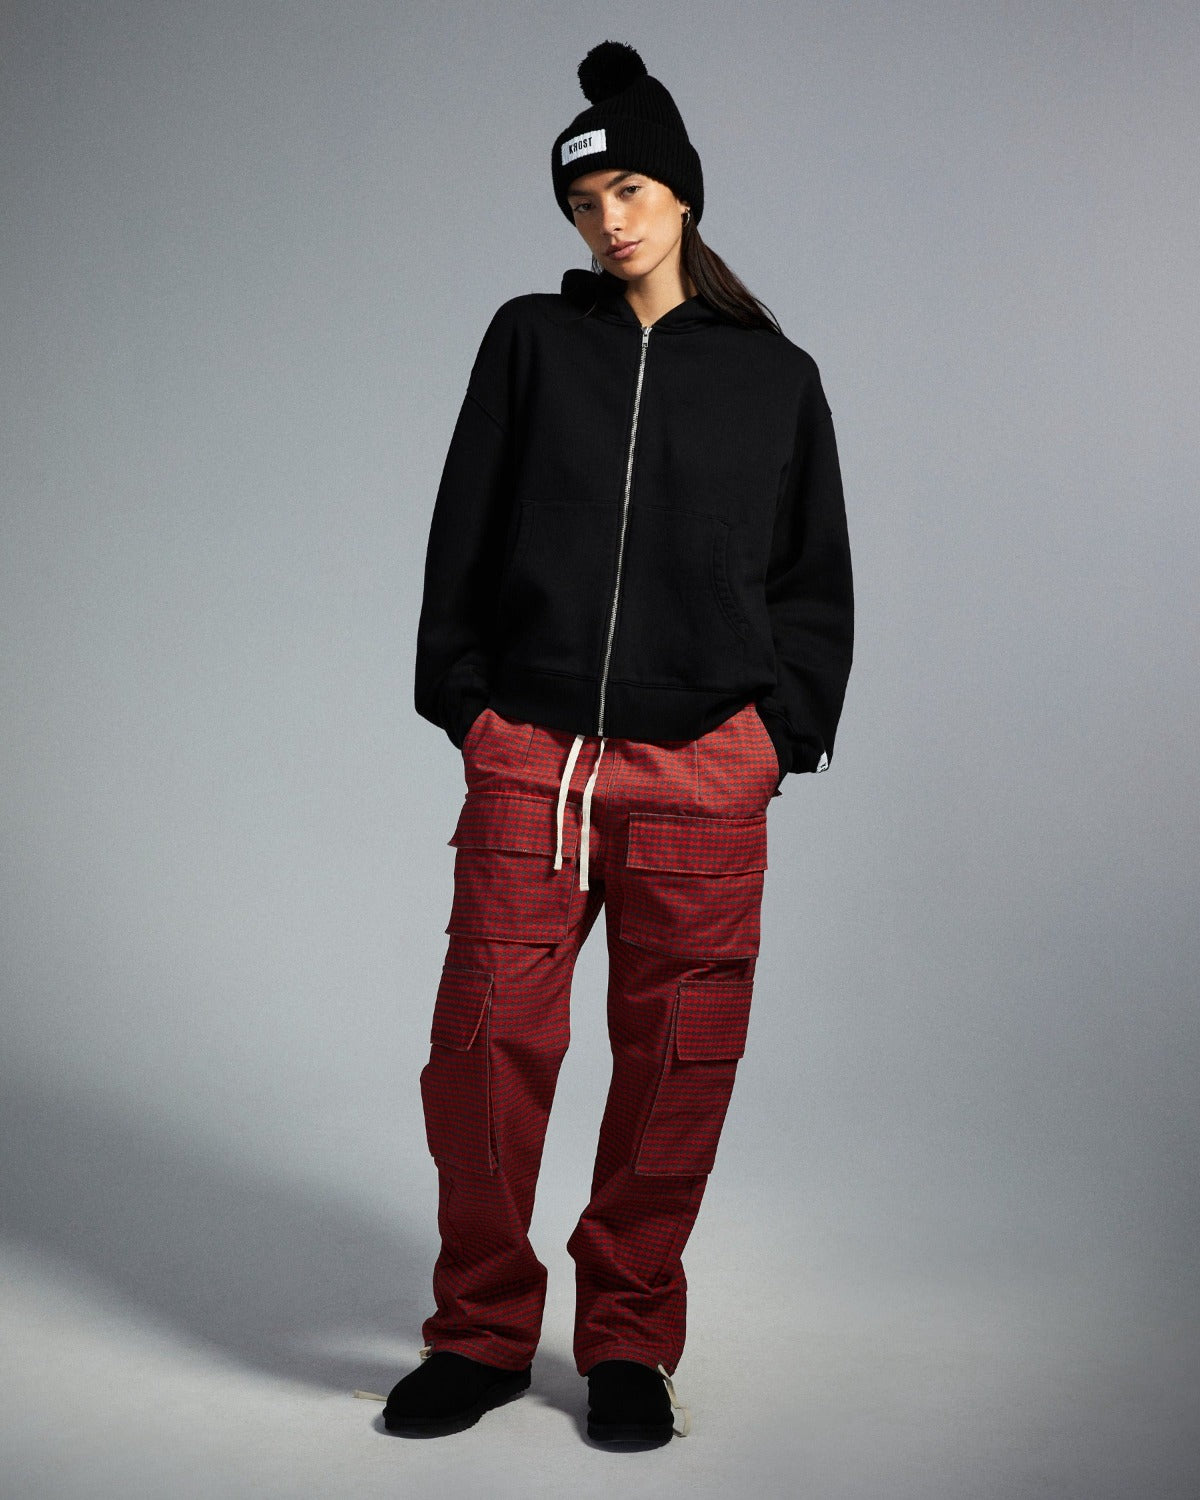 Red cargo pants  Red cargo pants, Red cargo pants outfit, Black